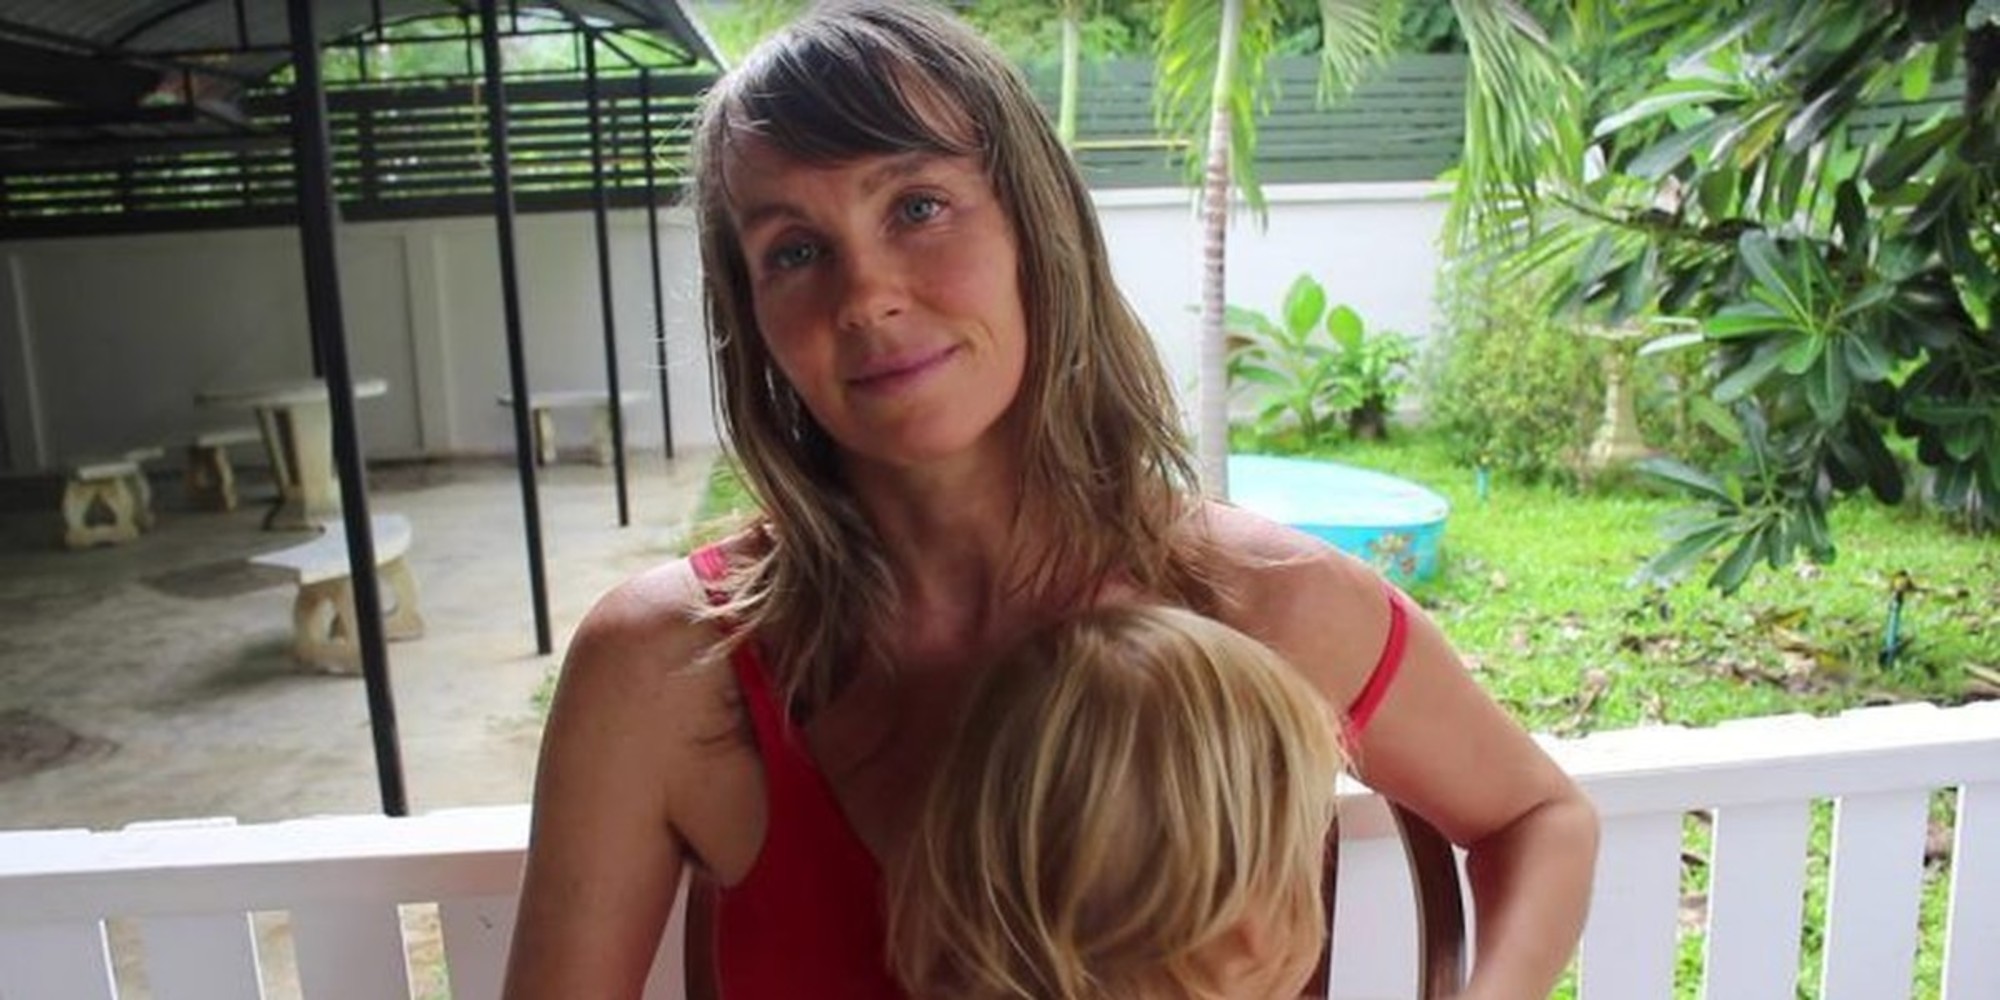 Has This Mom Breastfed Her Son For Too Long? image image